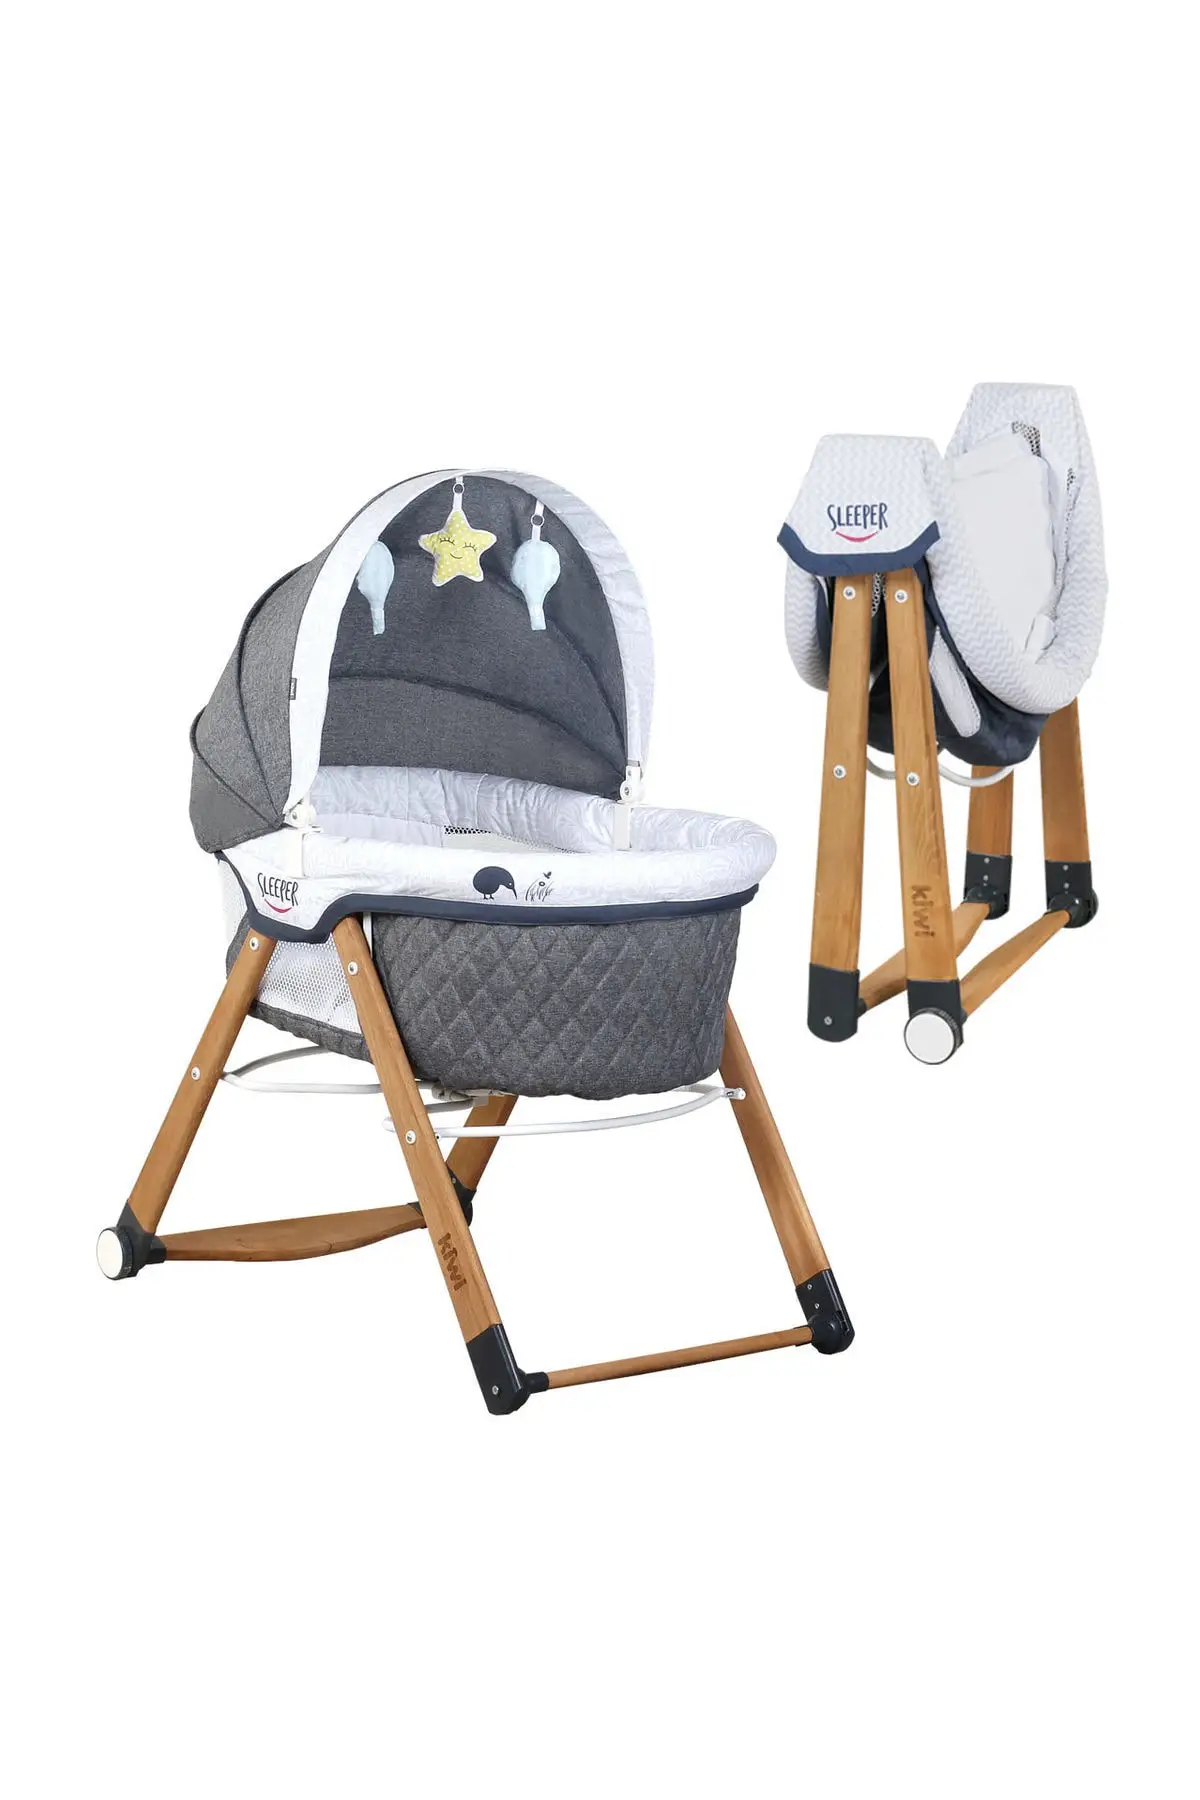 Sleeper All In One Natural Wooden Swinging Folding Baby Cradle with Wheels Leaf Patterned Gray